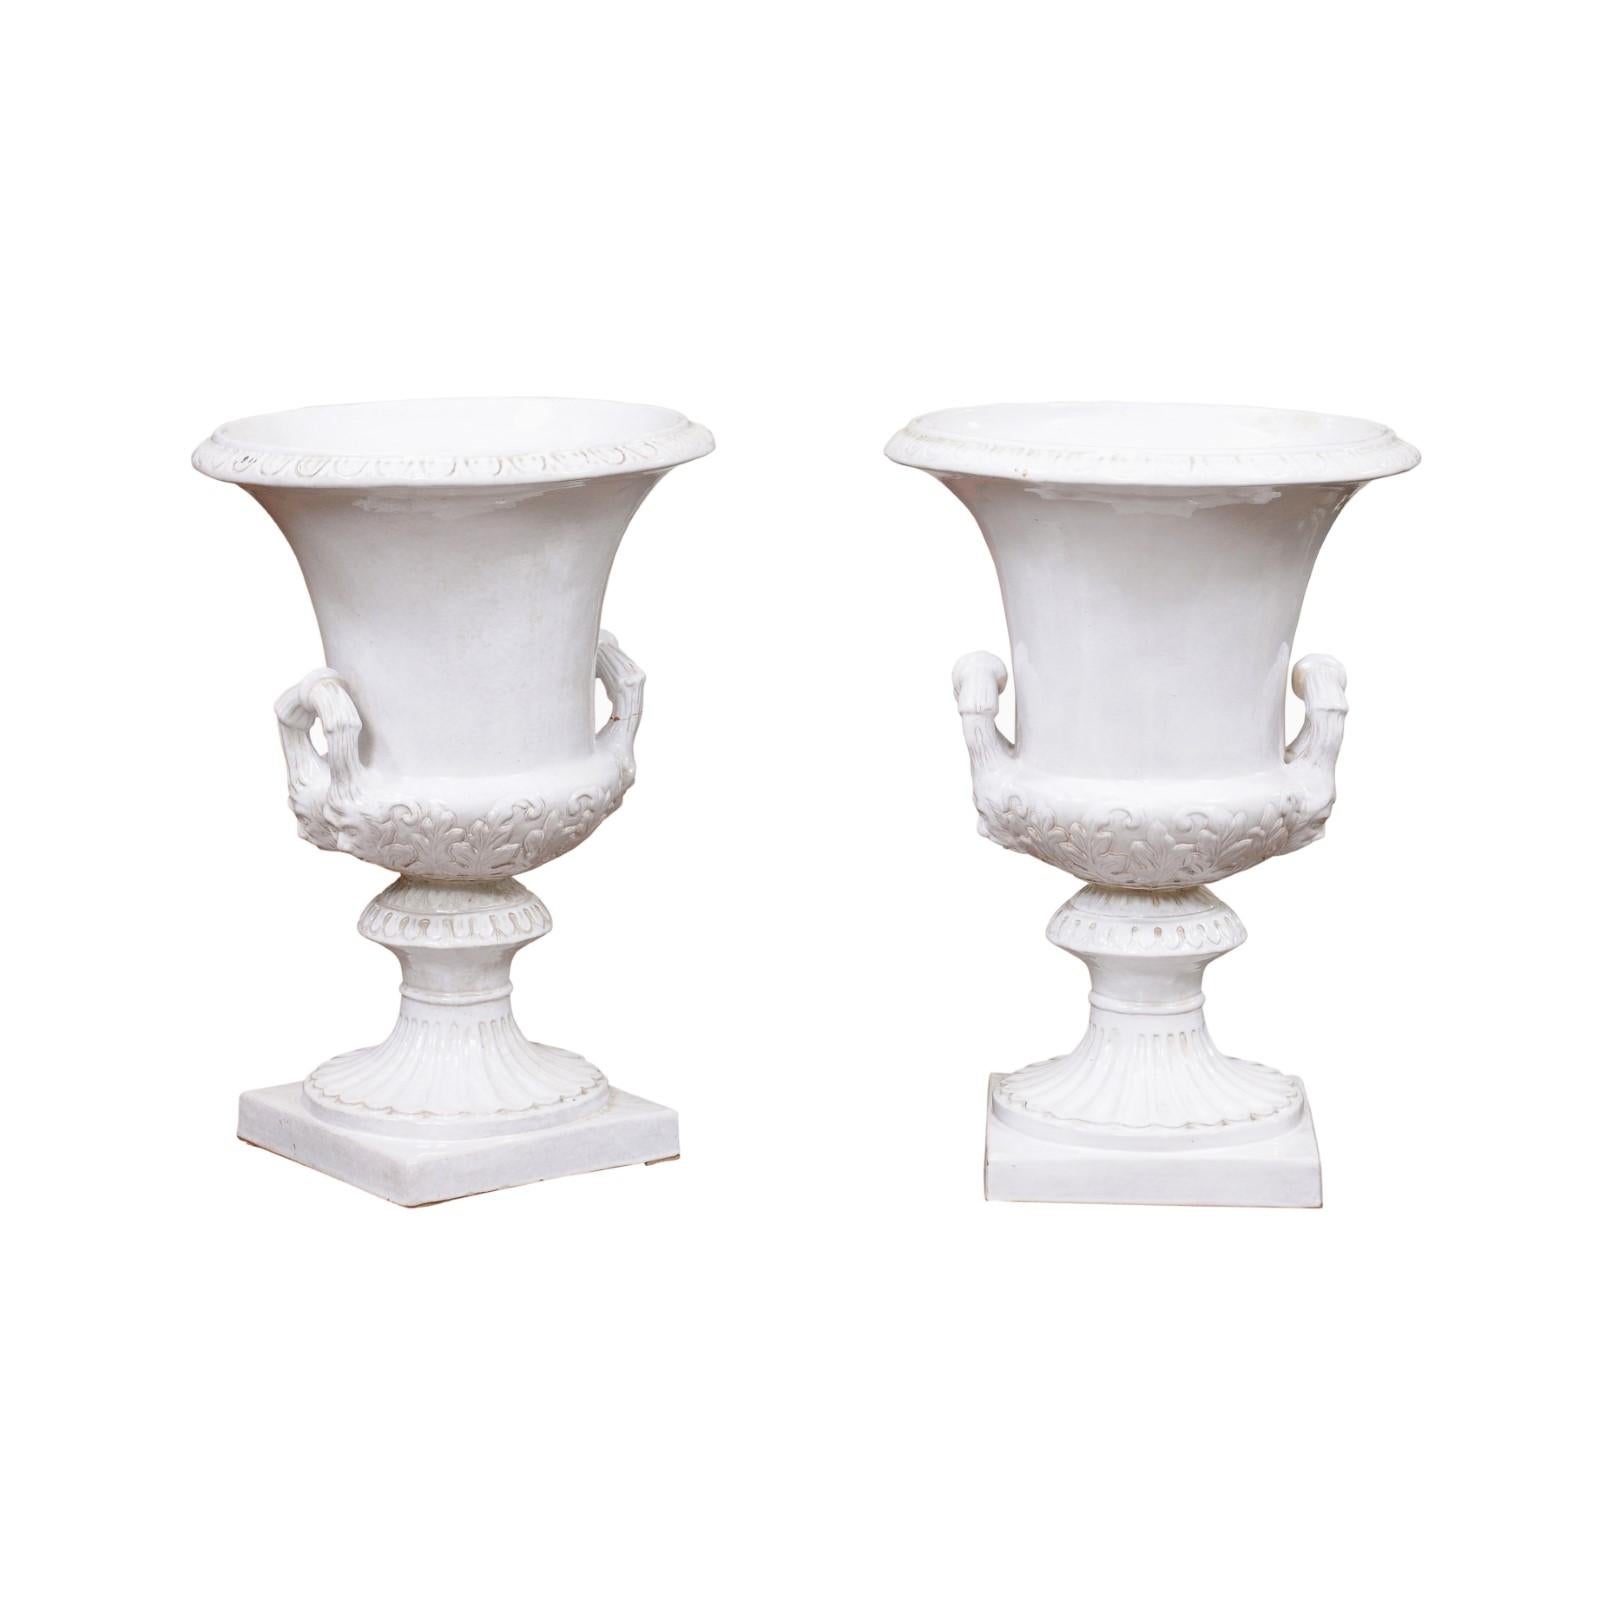 Pair of Large Italian White Glazed Urns, Neoclassical Style ca. 1890 In Fair Condition For Sale In Atlanta, GA